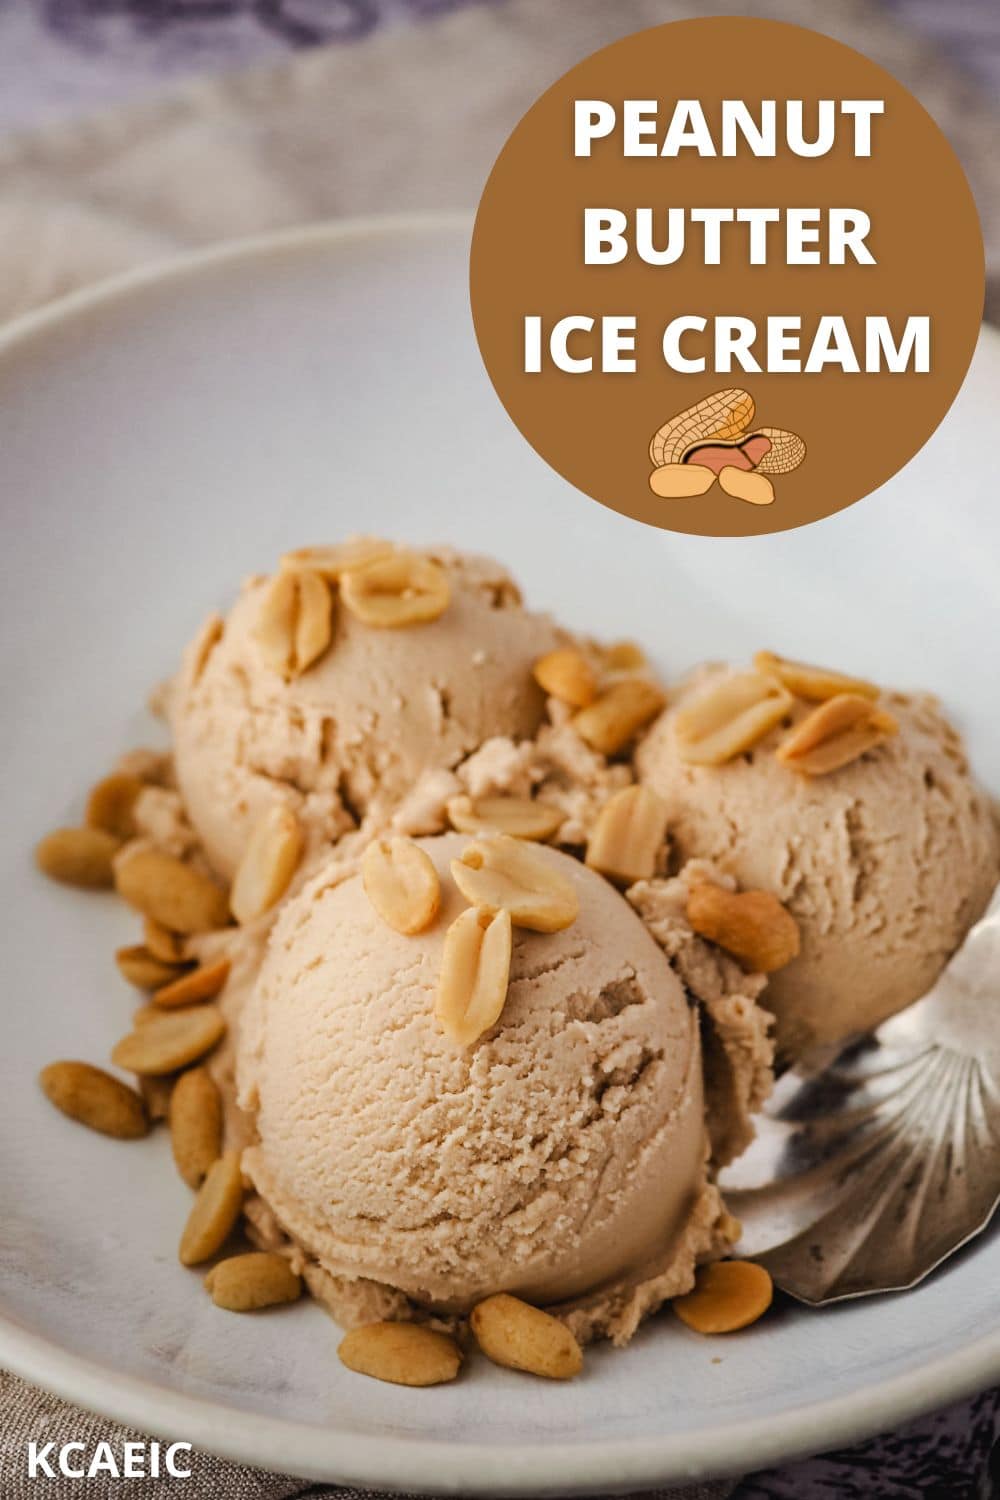 Peanut butter ice cream in a bowl with roasted peanuts, with text overlay.